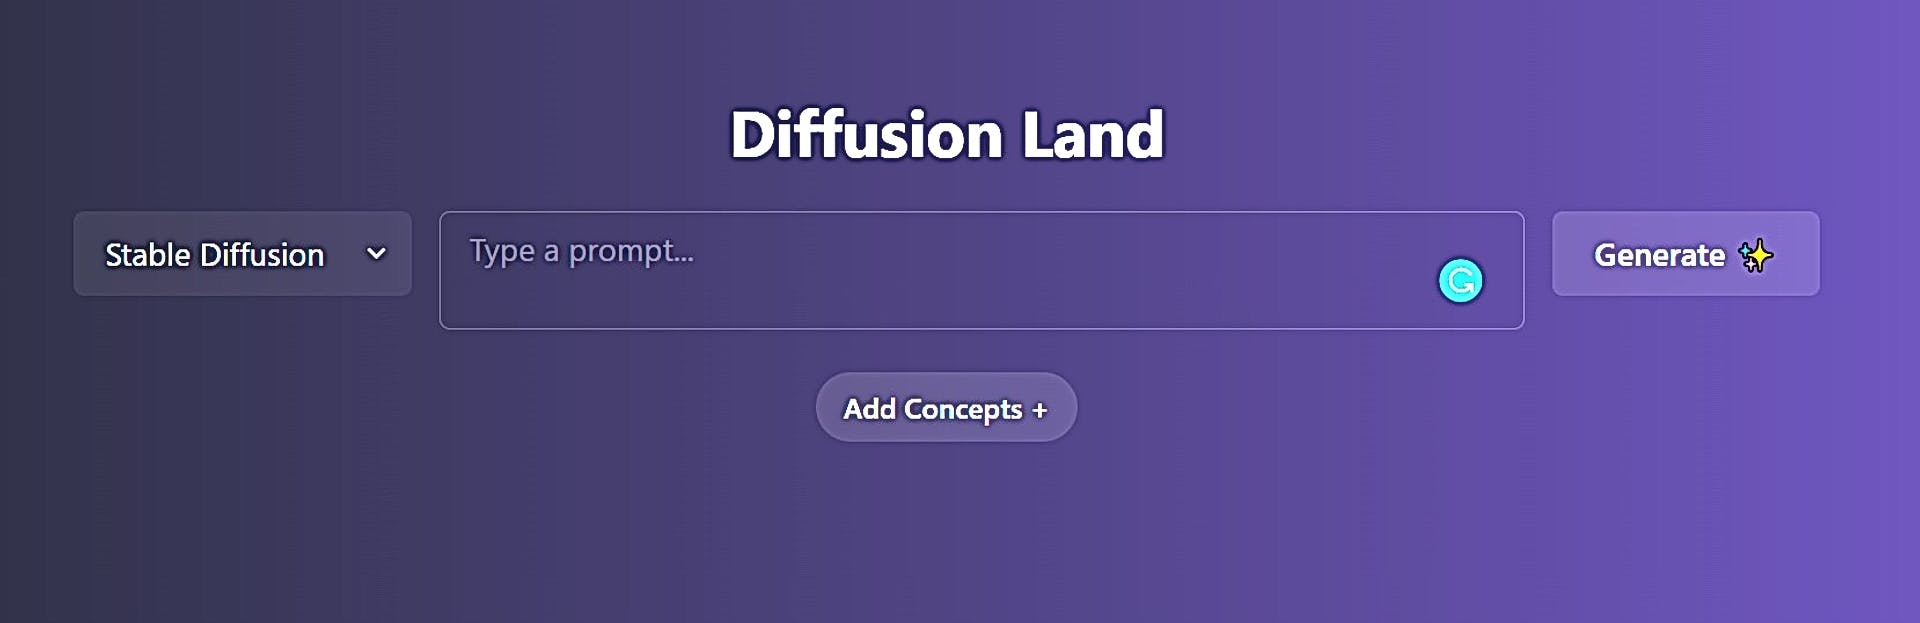 Diffusion Land featured